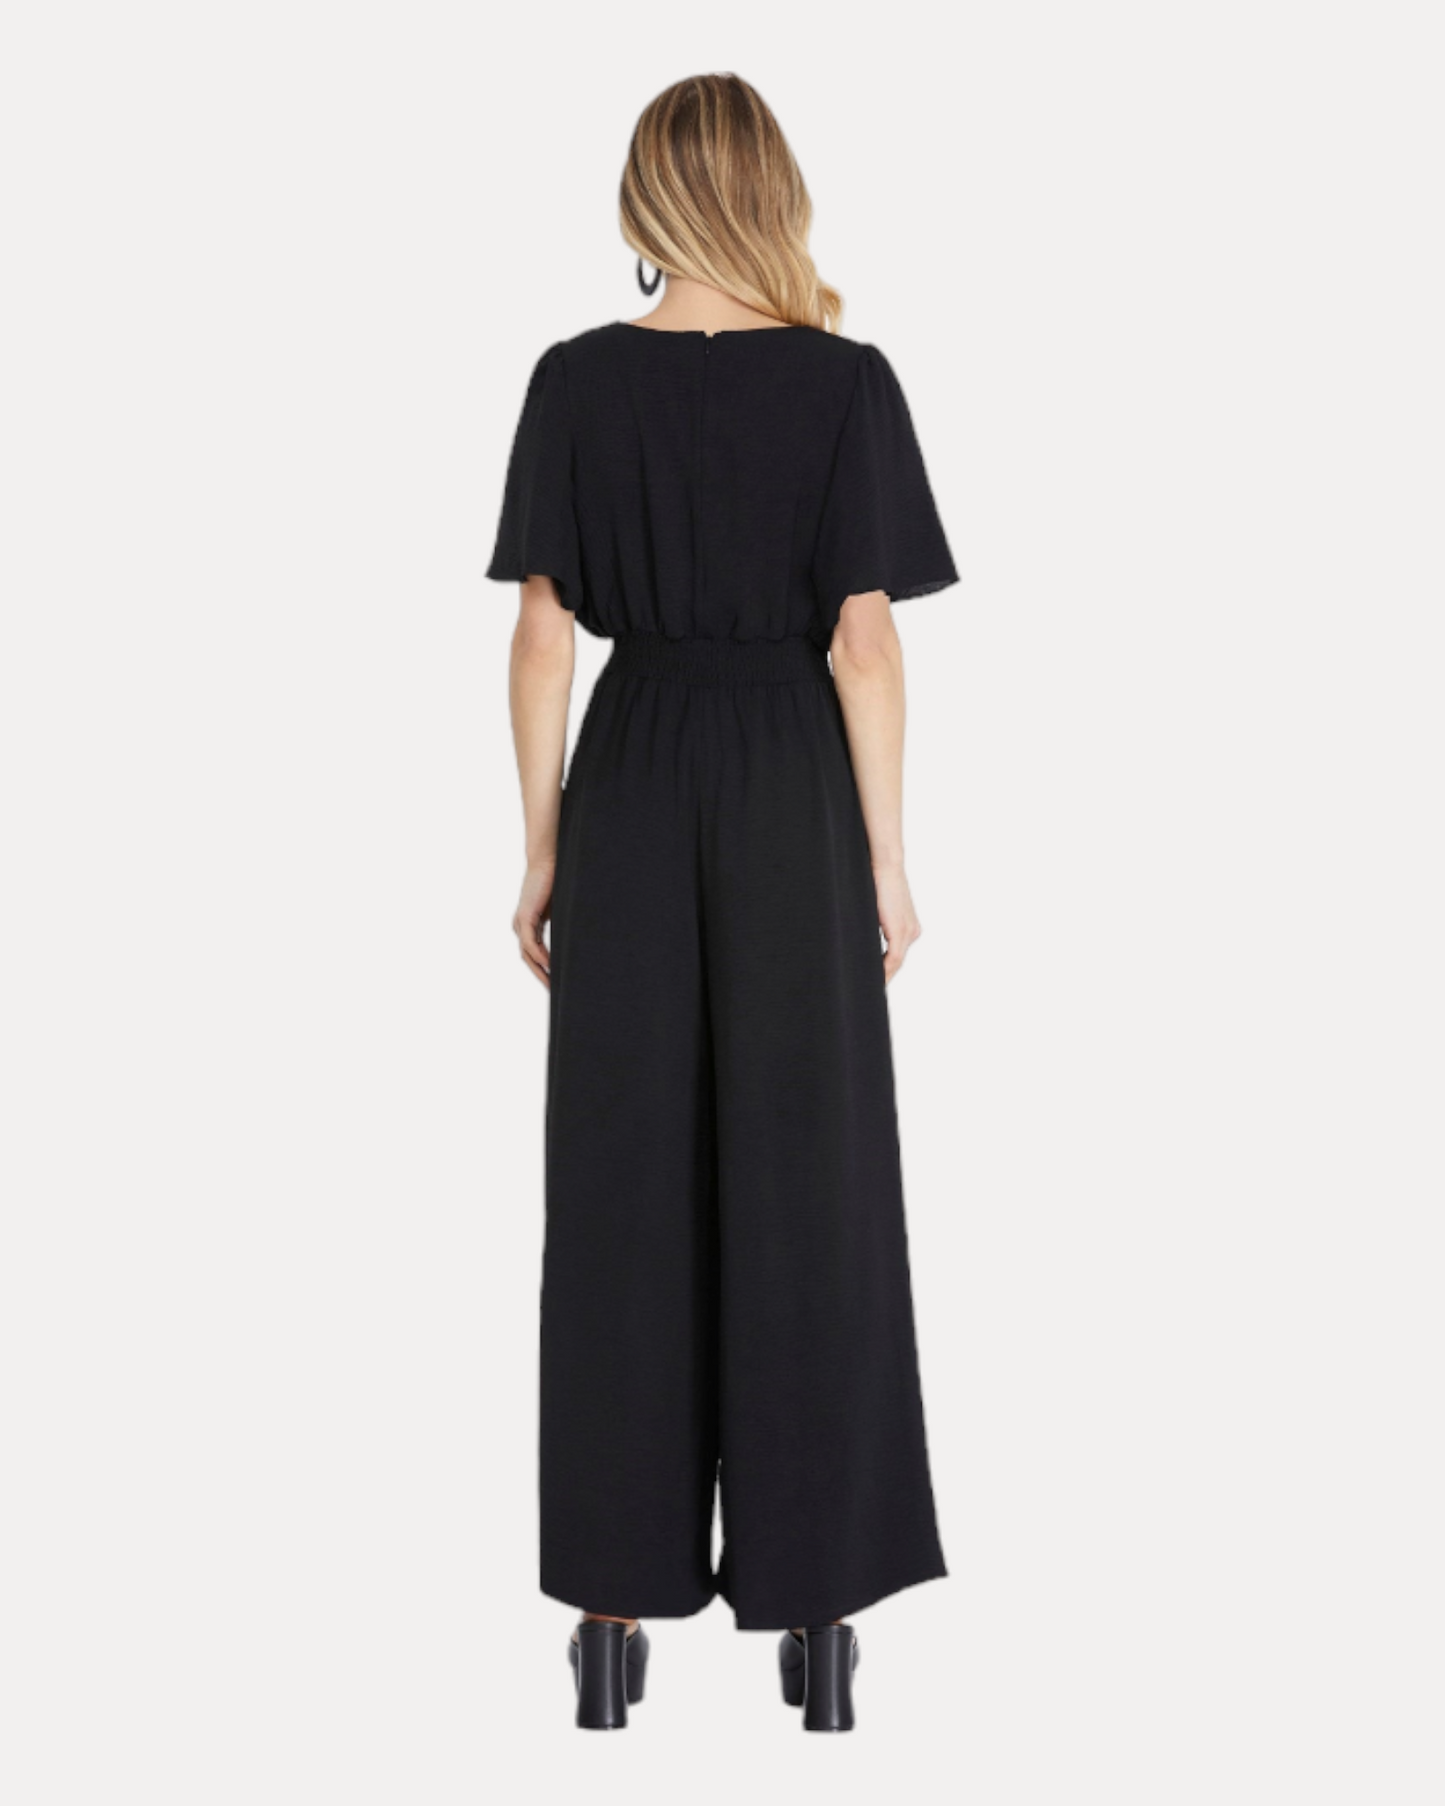 'The Midnight Chic' Jumpsuit